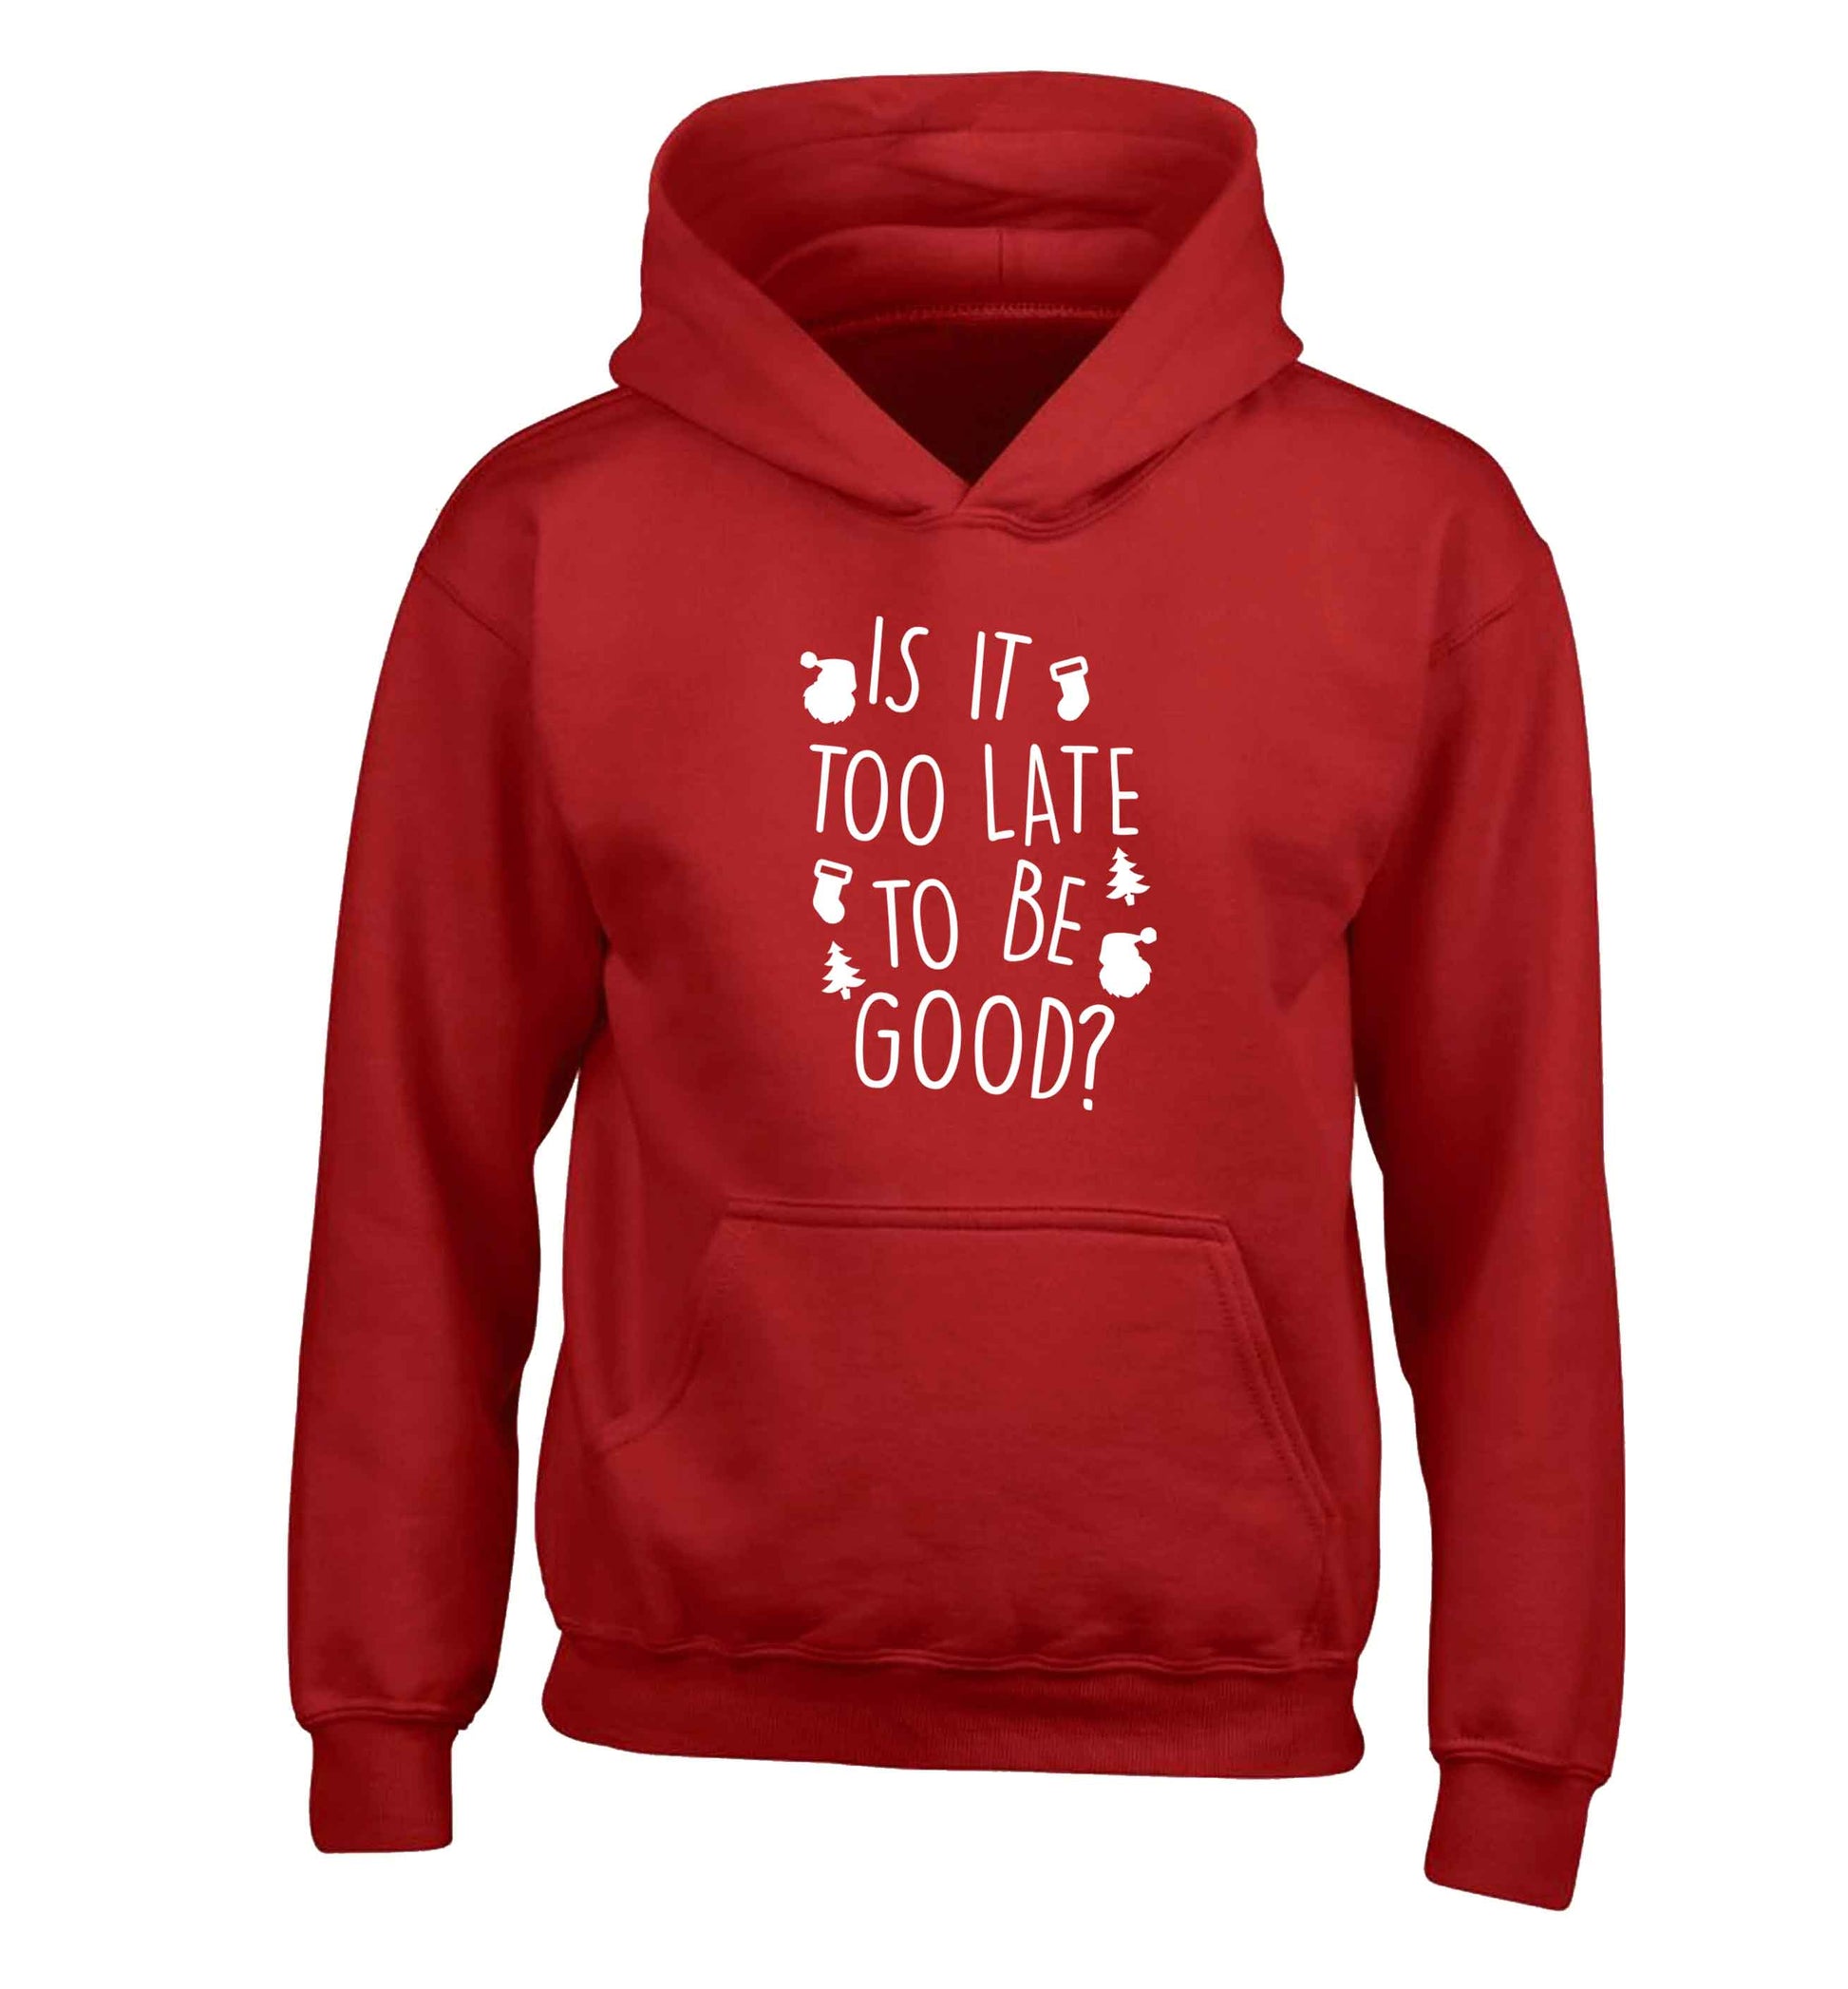 Too Late to be Good children's red hoodie 12-13 Years